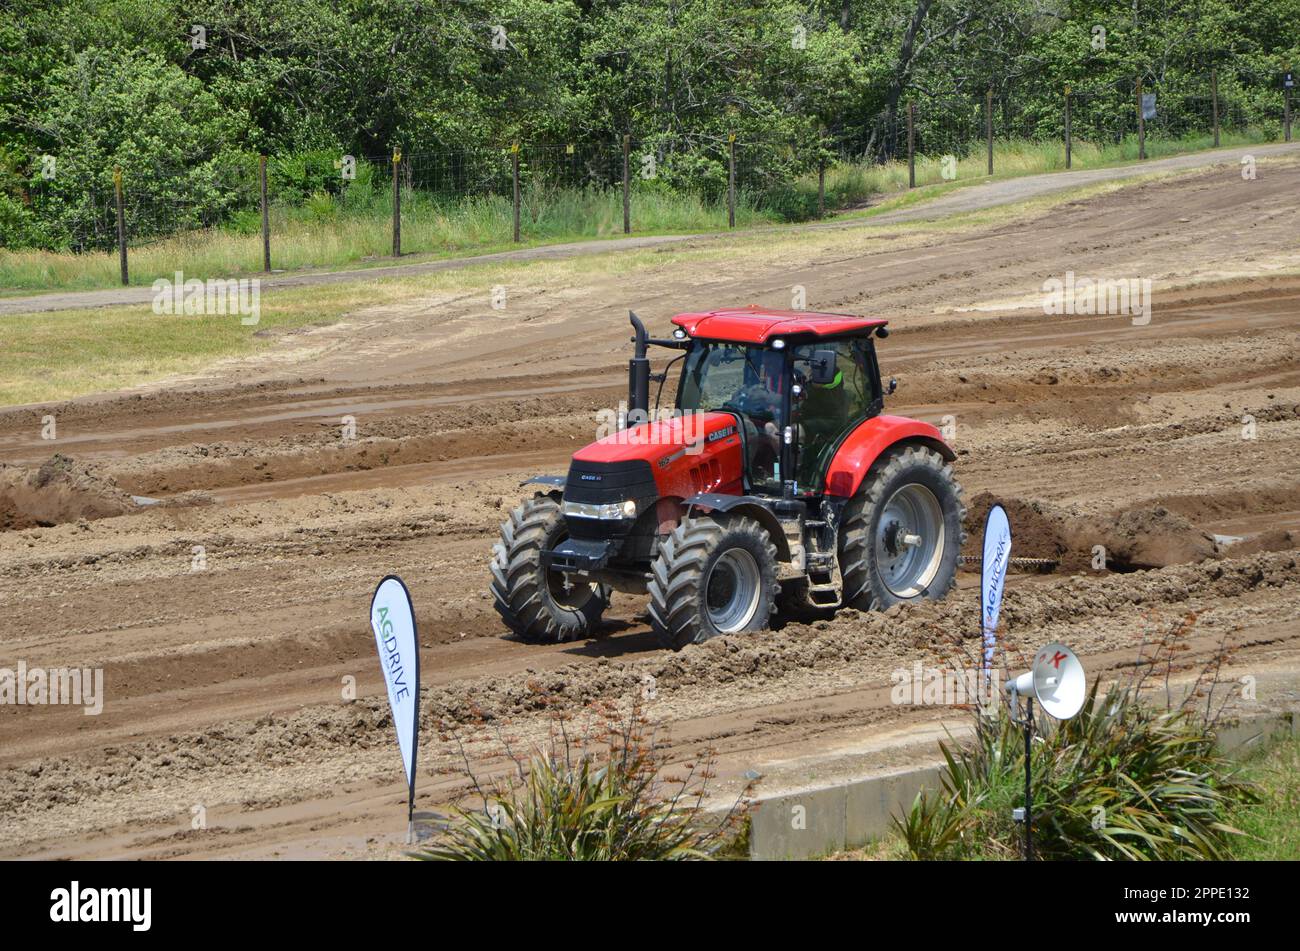 Case 11 Red Tractor At Feildays Tractor Pull Races.  Fieldays Is The Southern Hemisphere's Largest Agricultural Event. Stock Photo